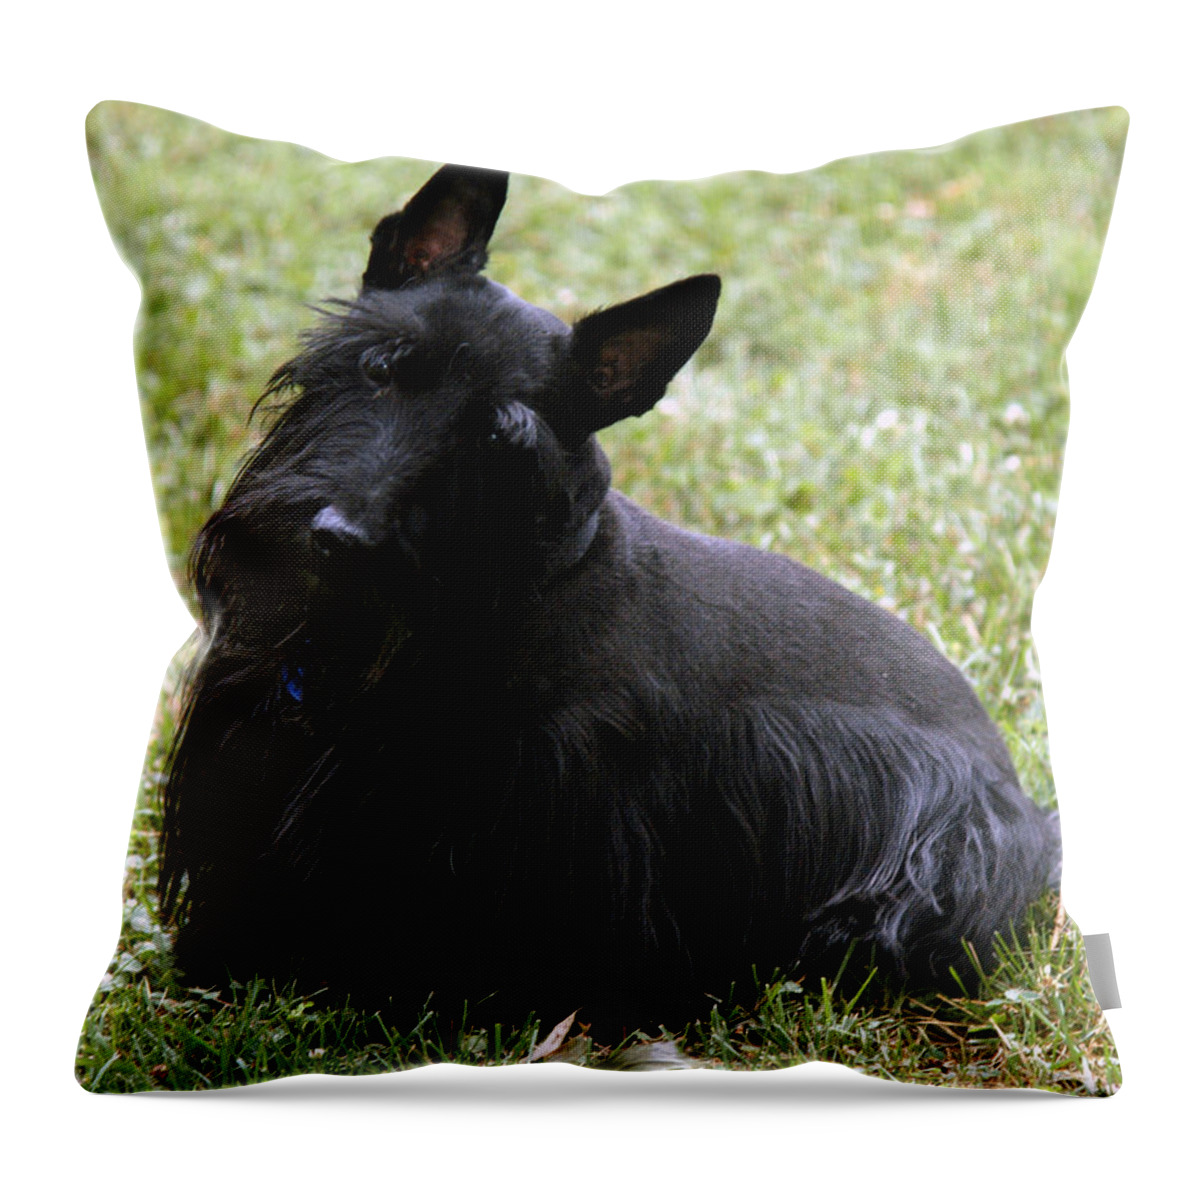 Scottish Terrier Throw Pillow featuring the photograph Can't Hear You by Wanda Brandon